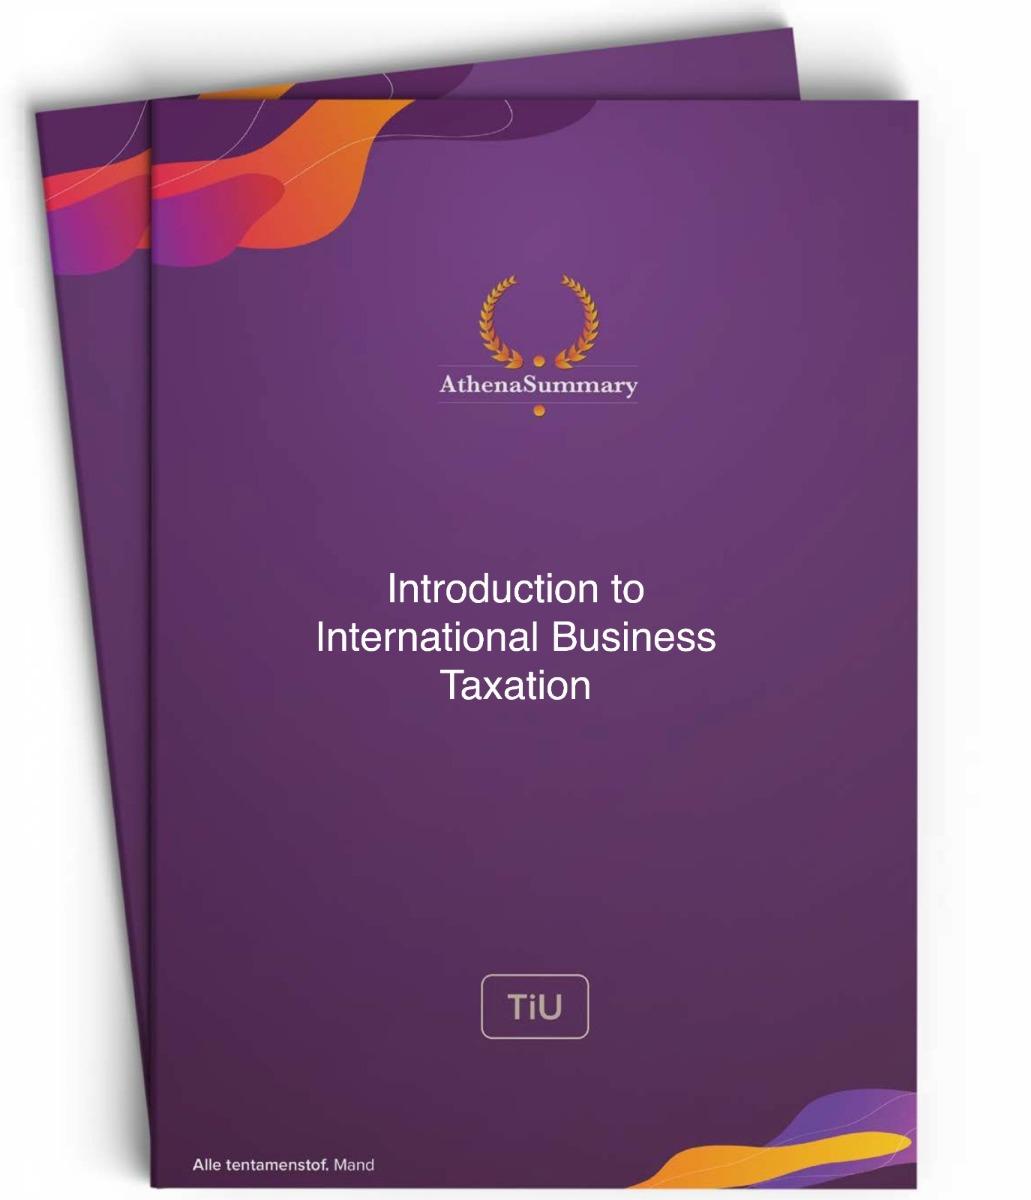 Literature and Lecture Summary: Introduction to International Business Taxation